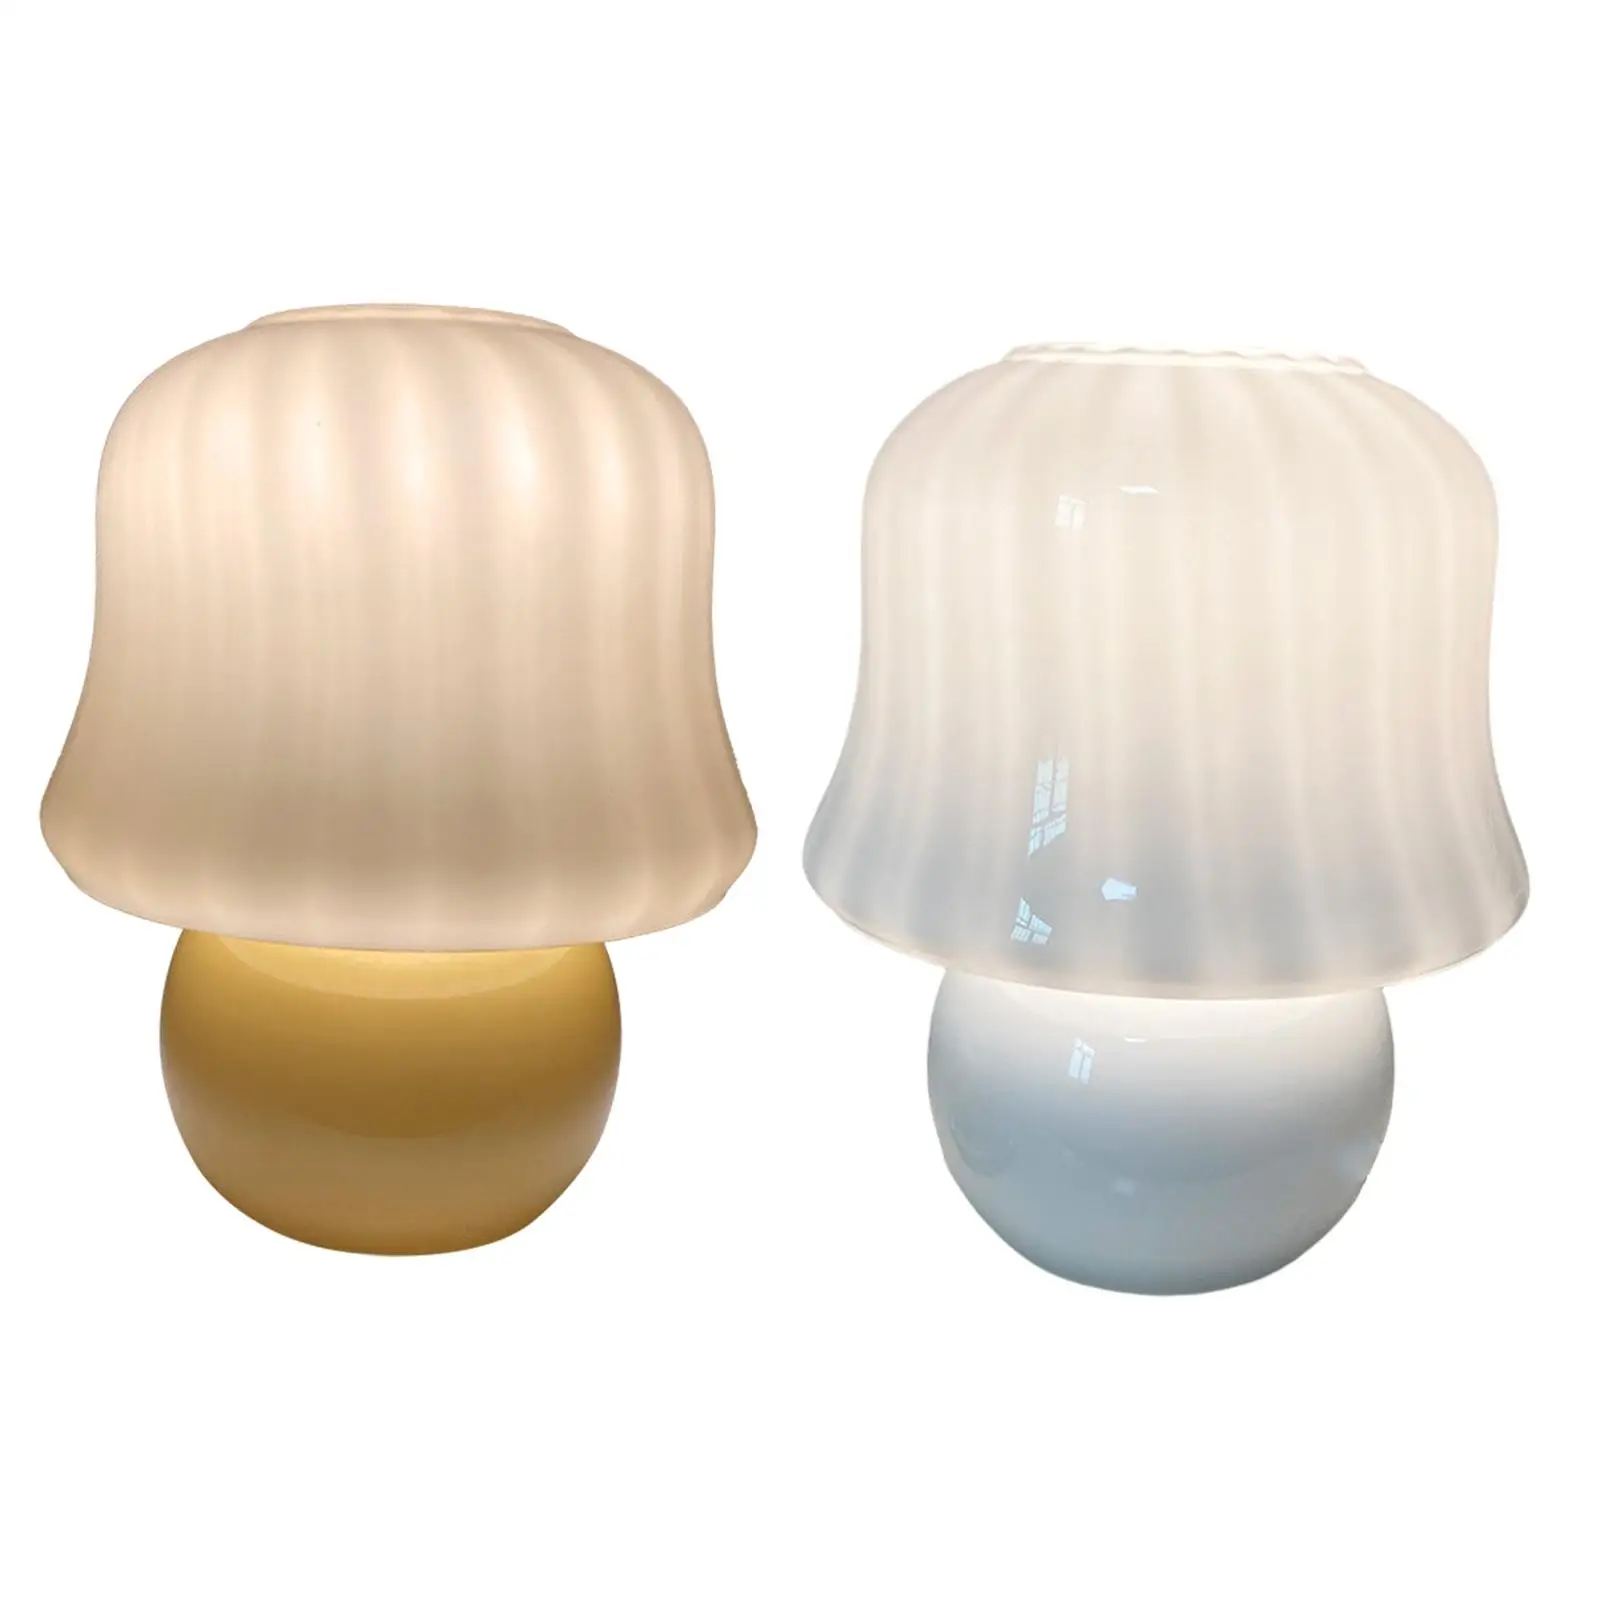 Retro Style Mushroom Table Lamp Bedside Decoration Bedroom Glass Baby Office